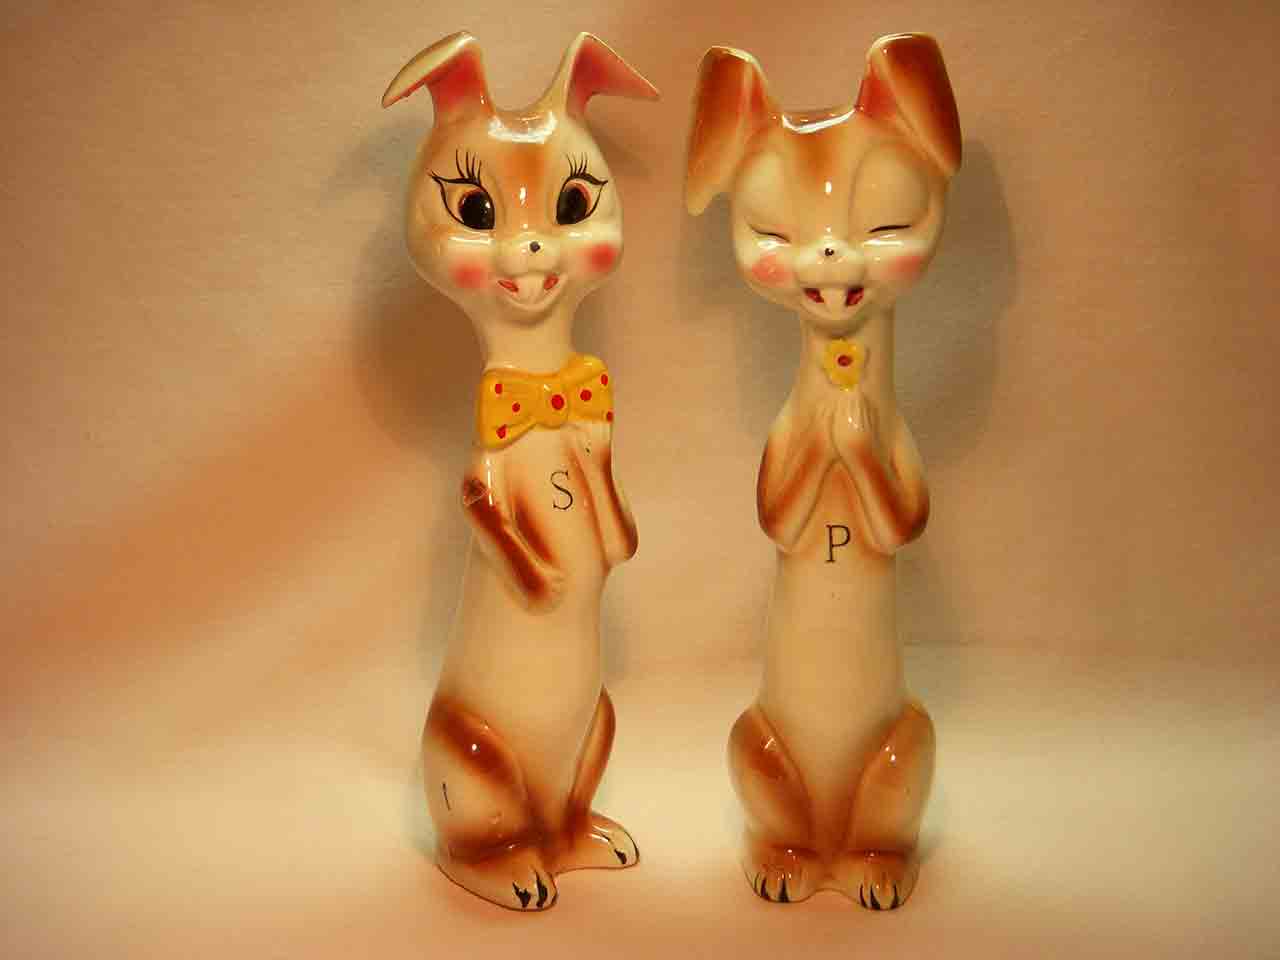 Japan Stamped 3729 tallboy series of salt and pepper shakers - bunny rabbits